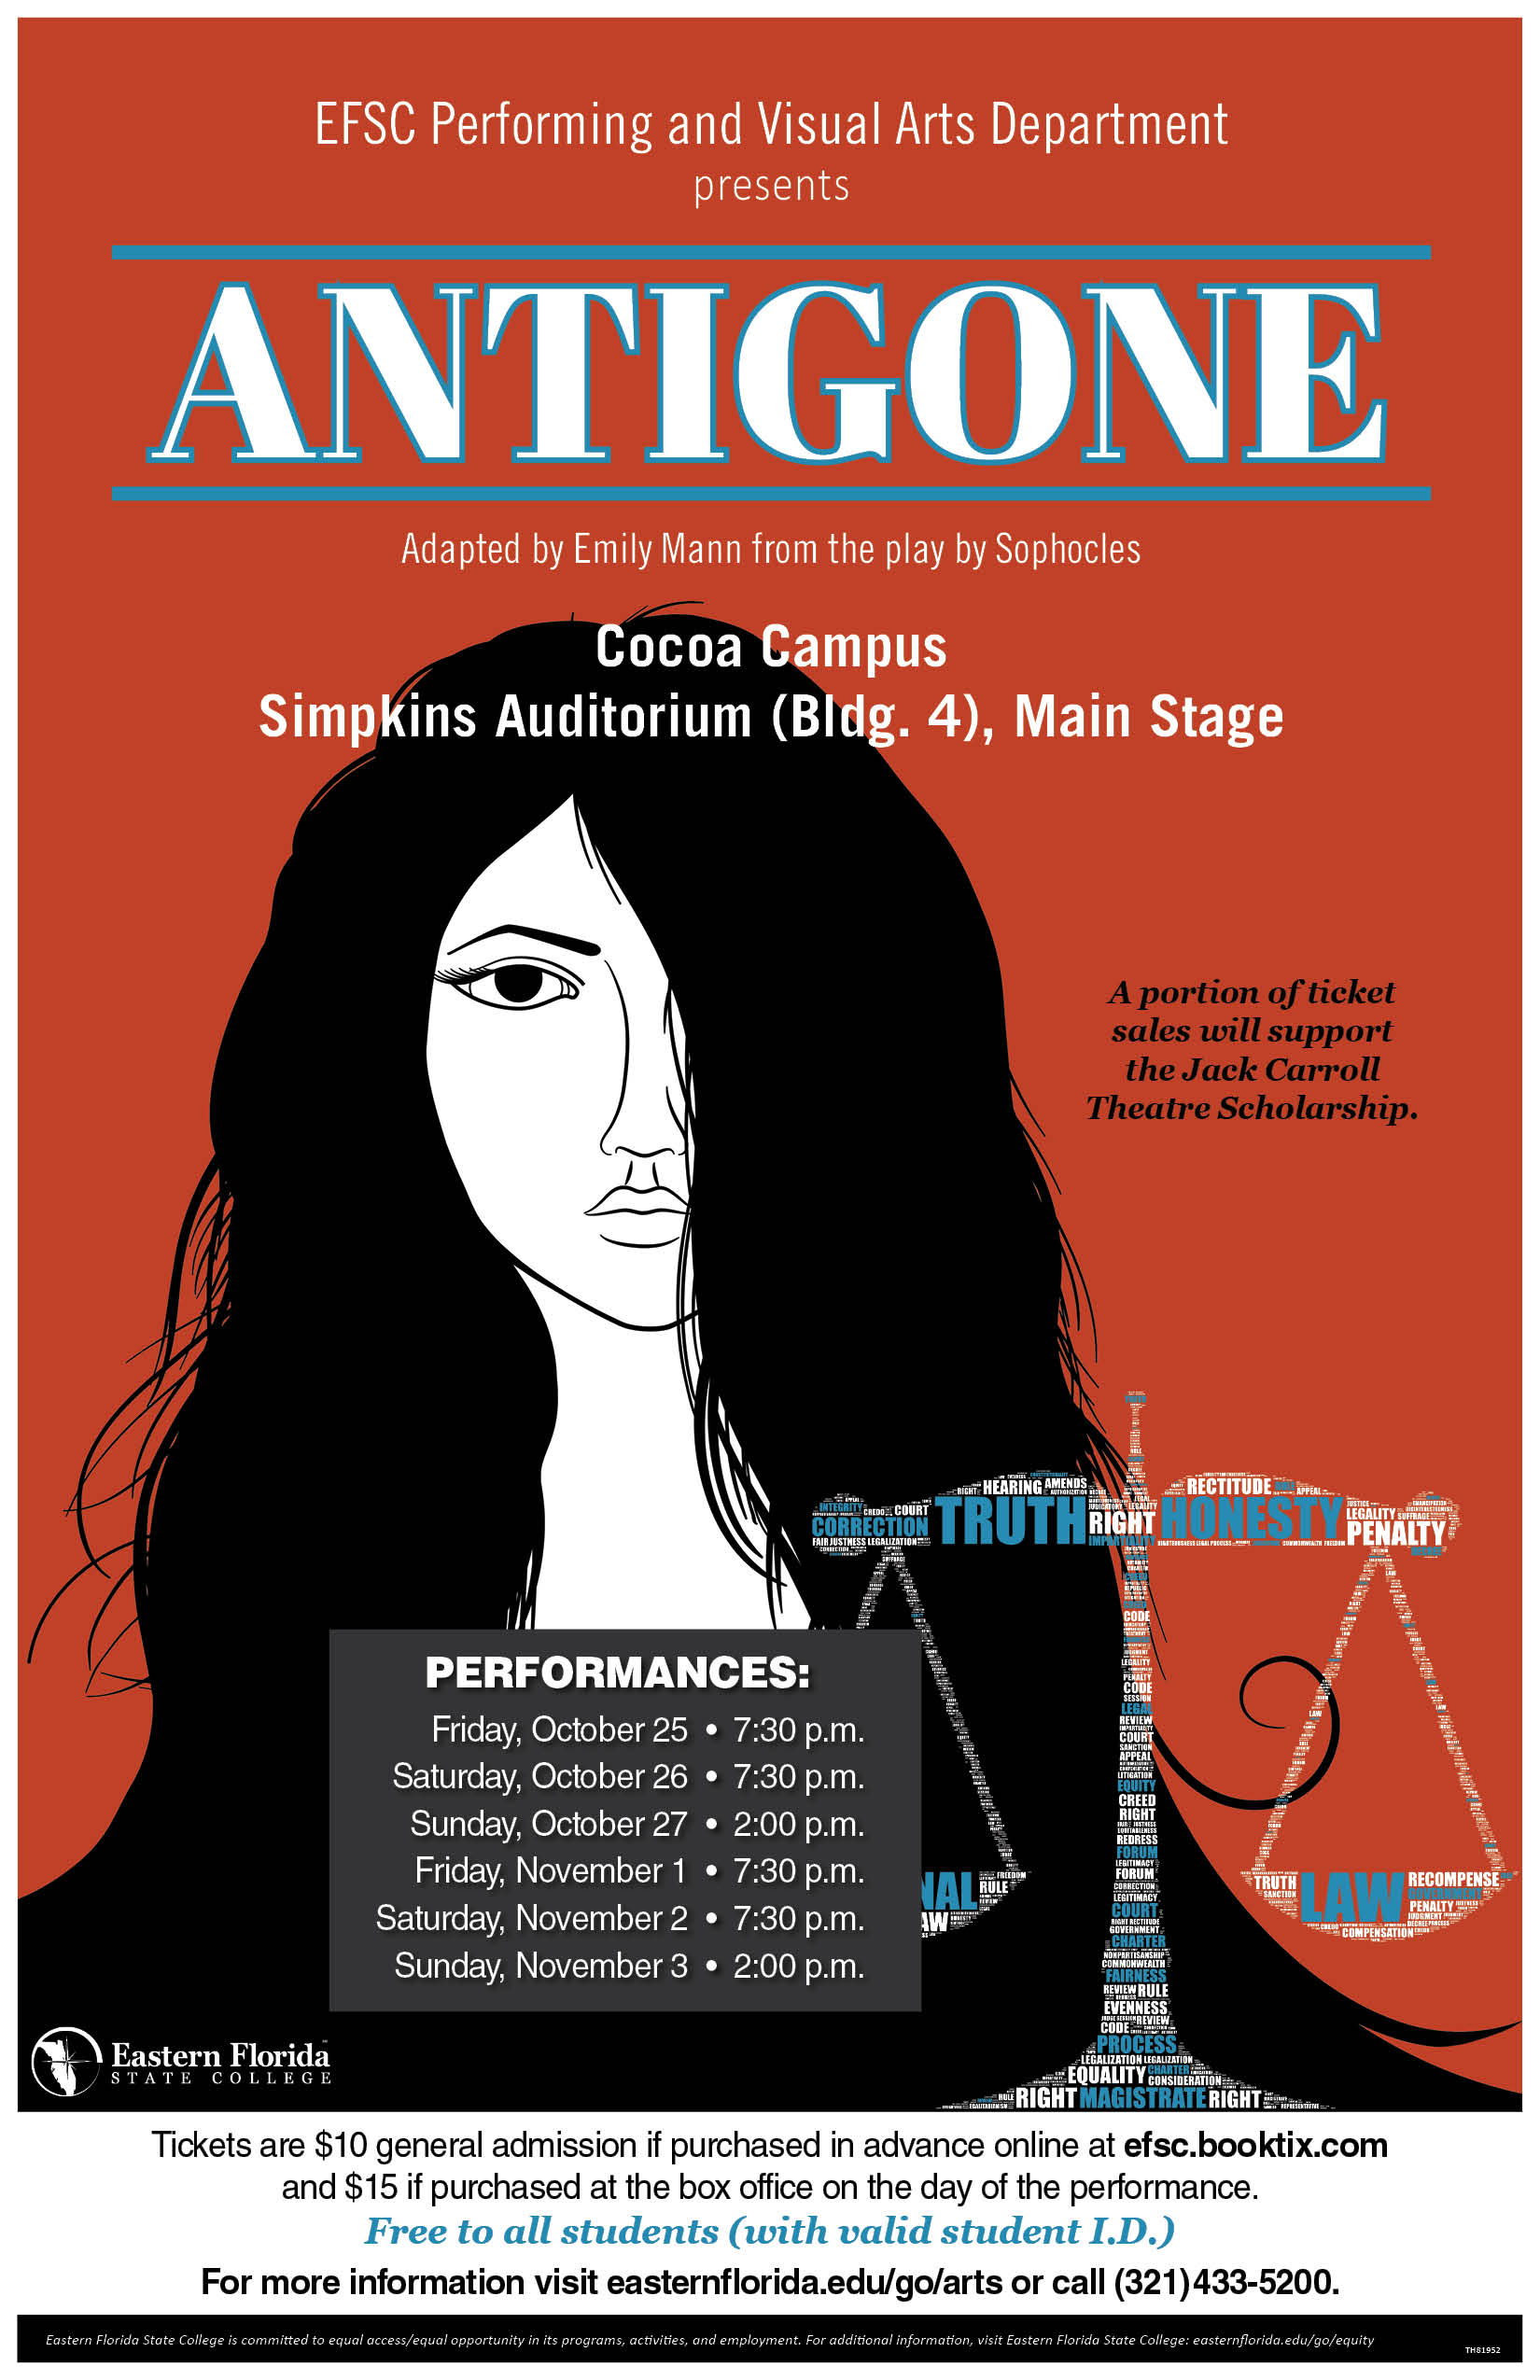 Antigone presented by EFSC Performing and Visual Arts Department